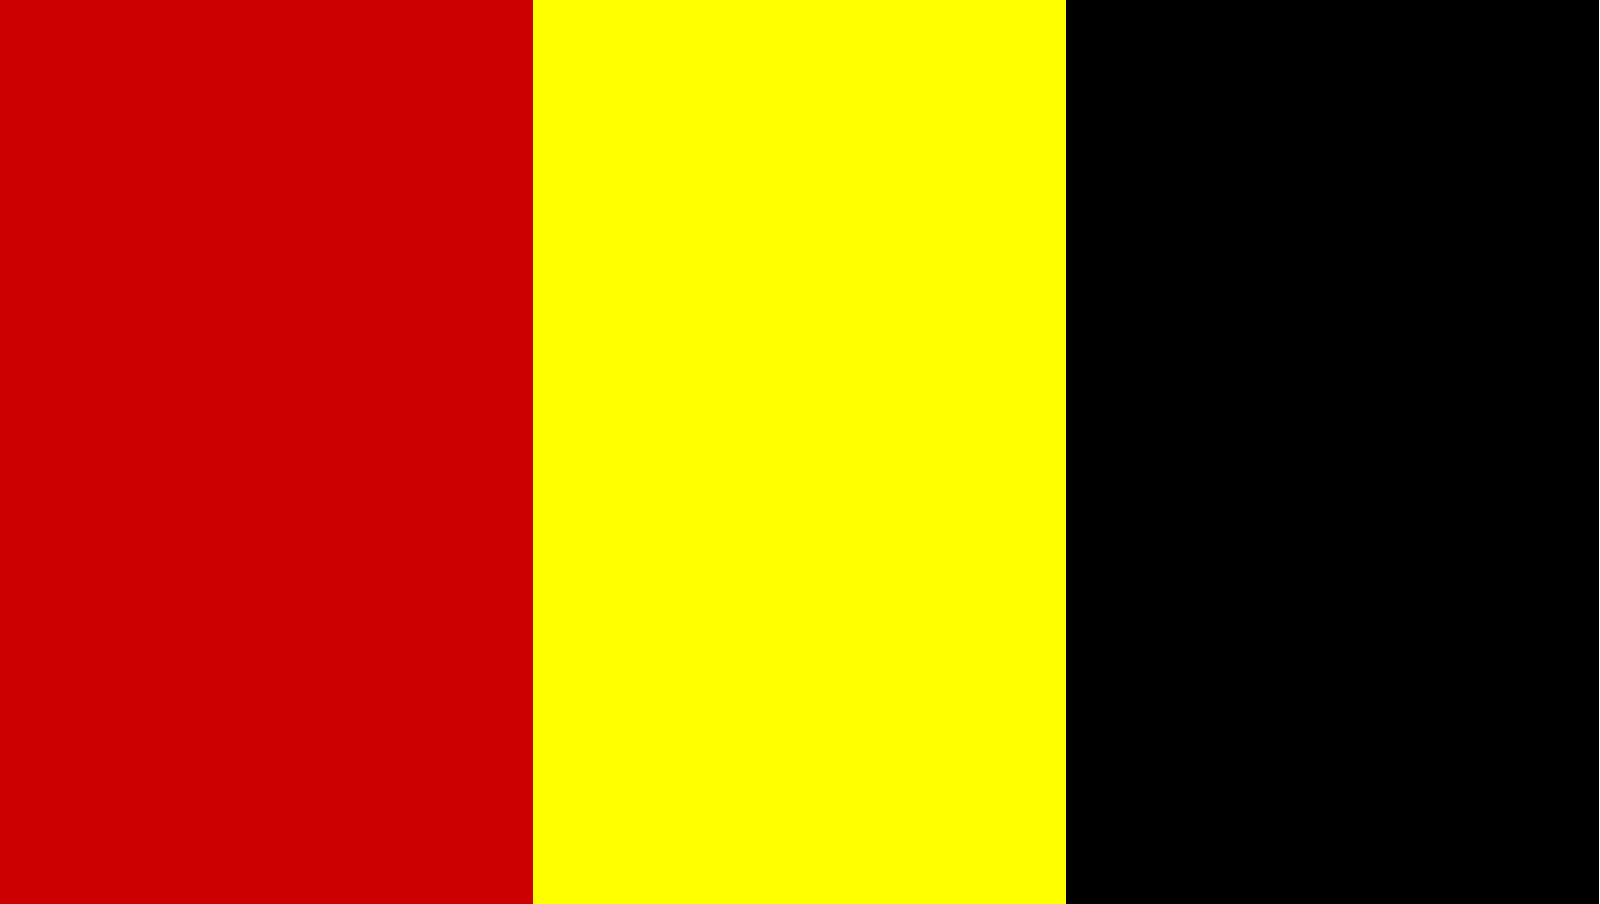 Red, yellow and black stripes representing colours of the Aboriginal flag